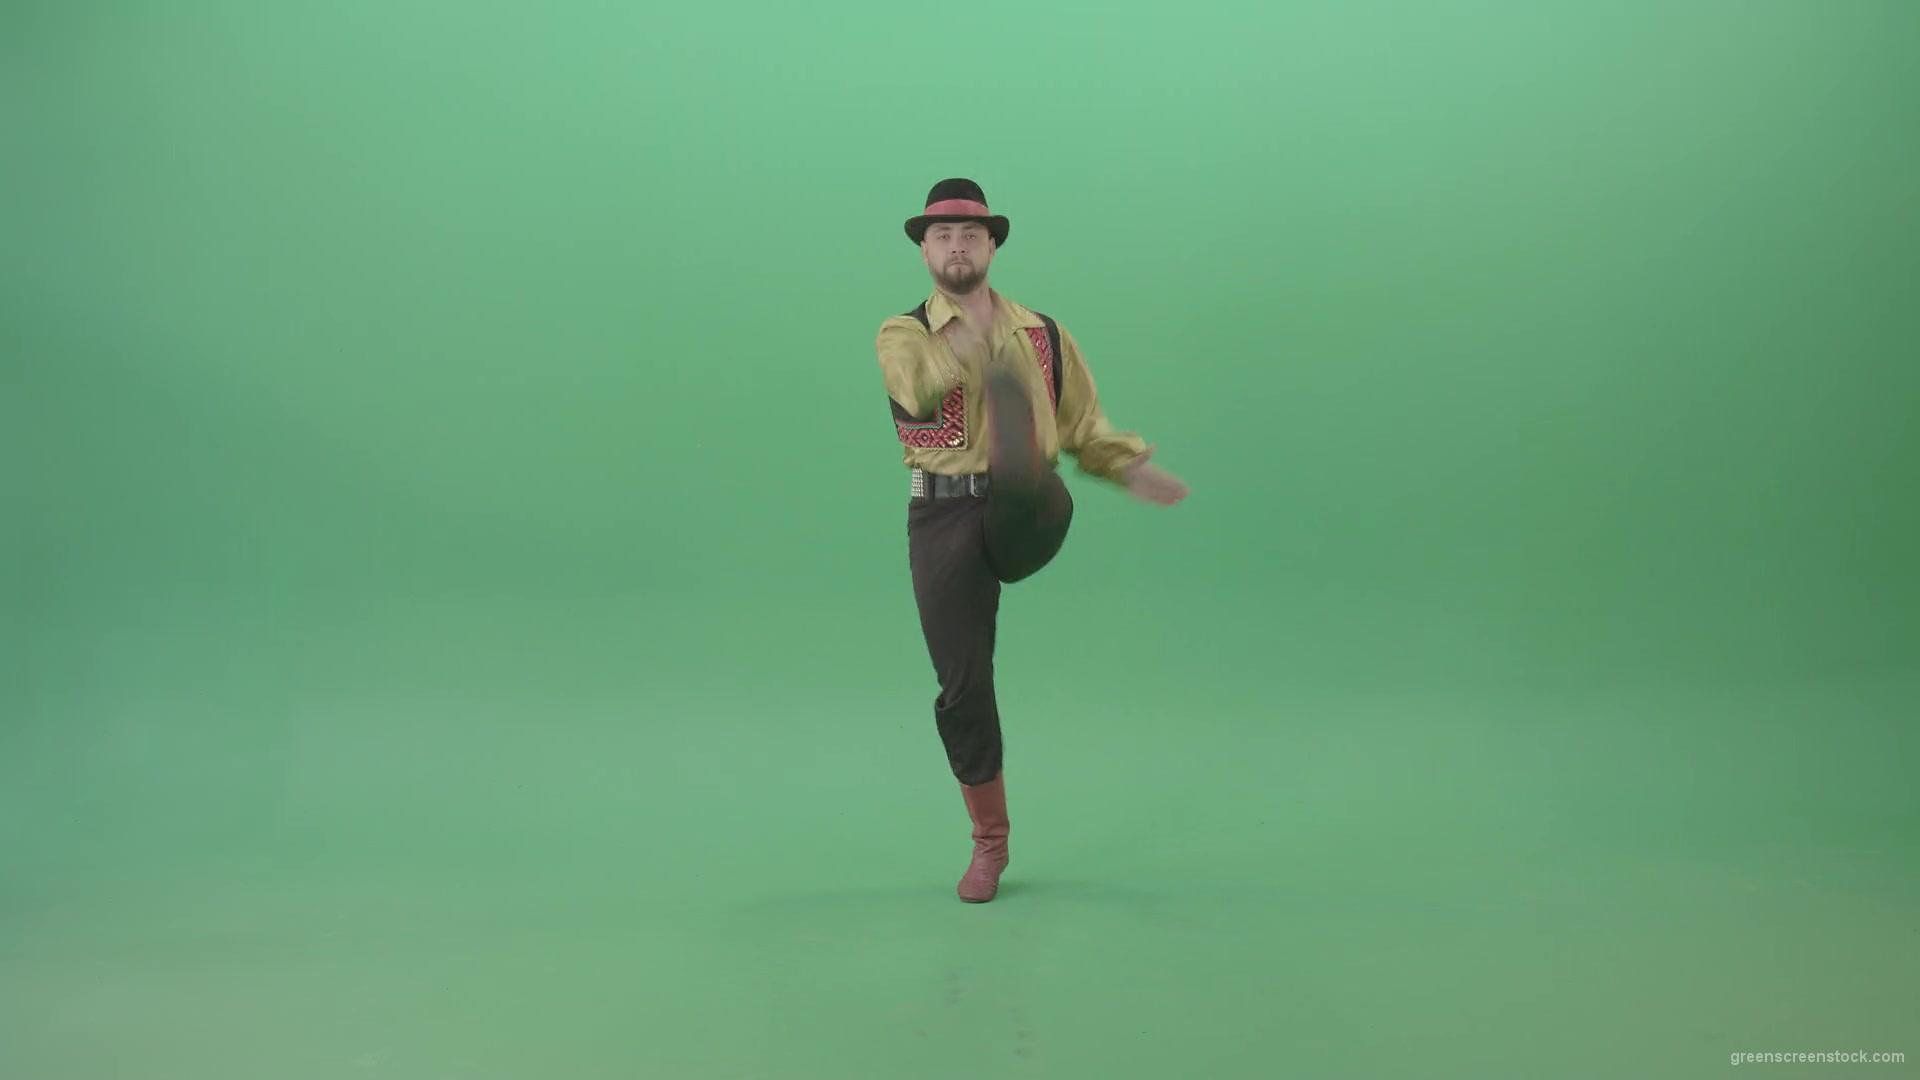 Funny-dancing-Gipsy-in-Moldova-jumping-isolated-on-Green-Screen-4K-Video-Footage-1920_004 Green Screen Stock